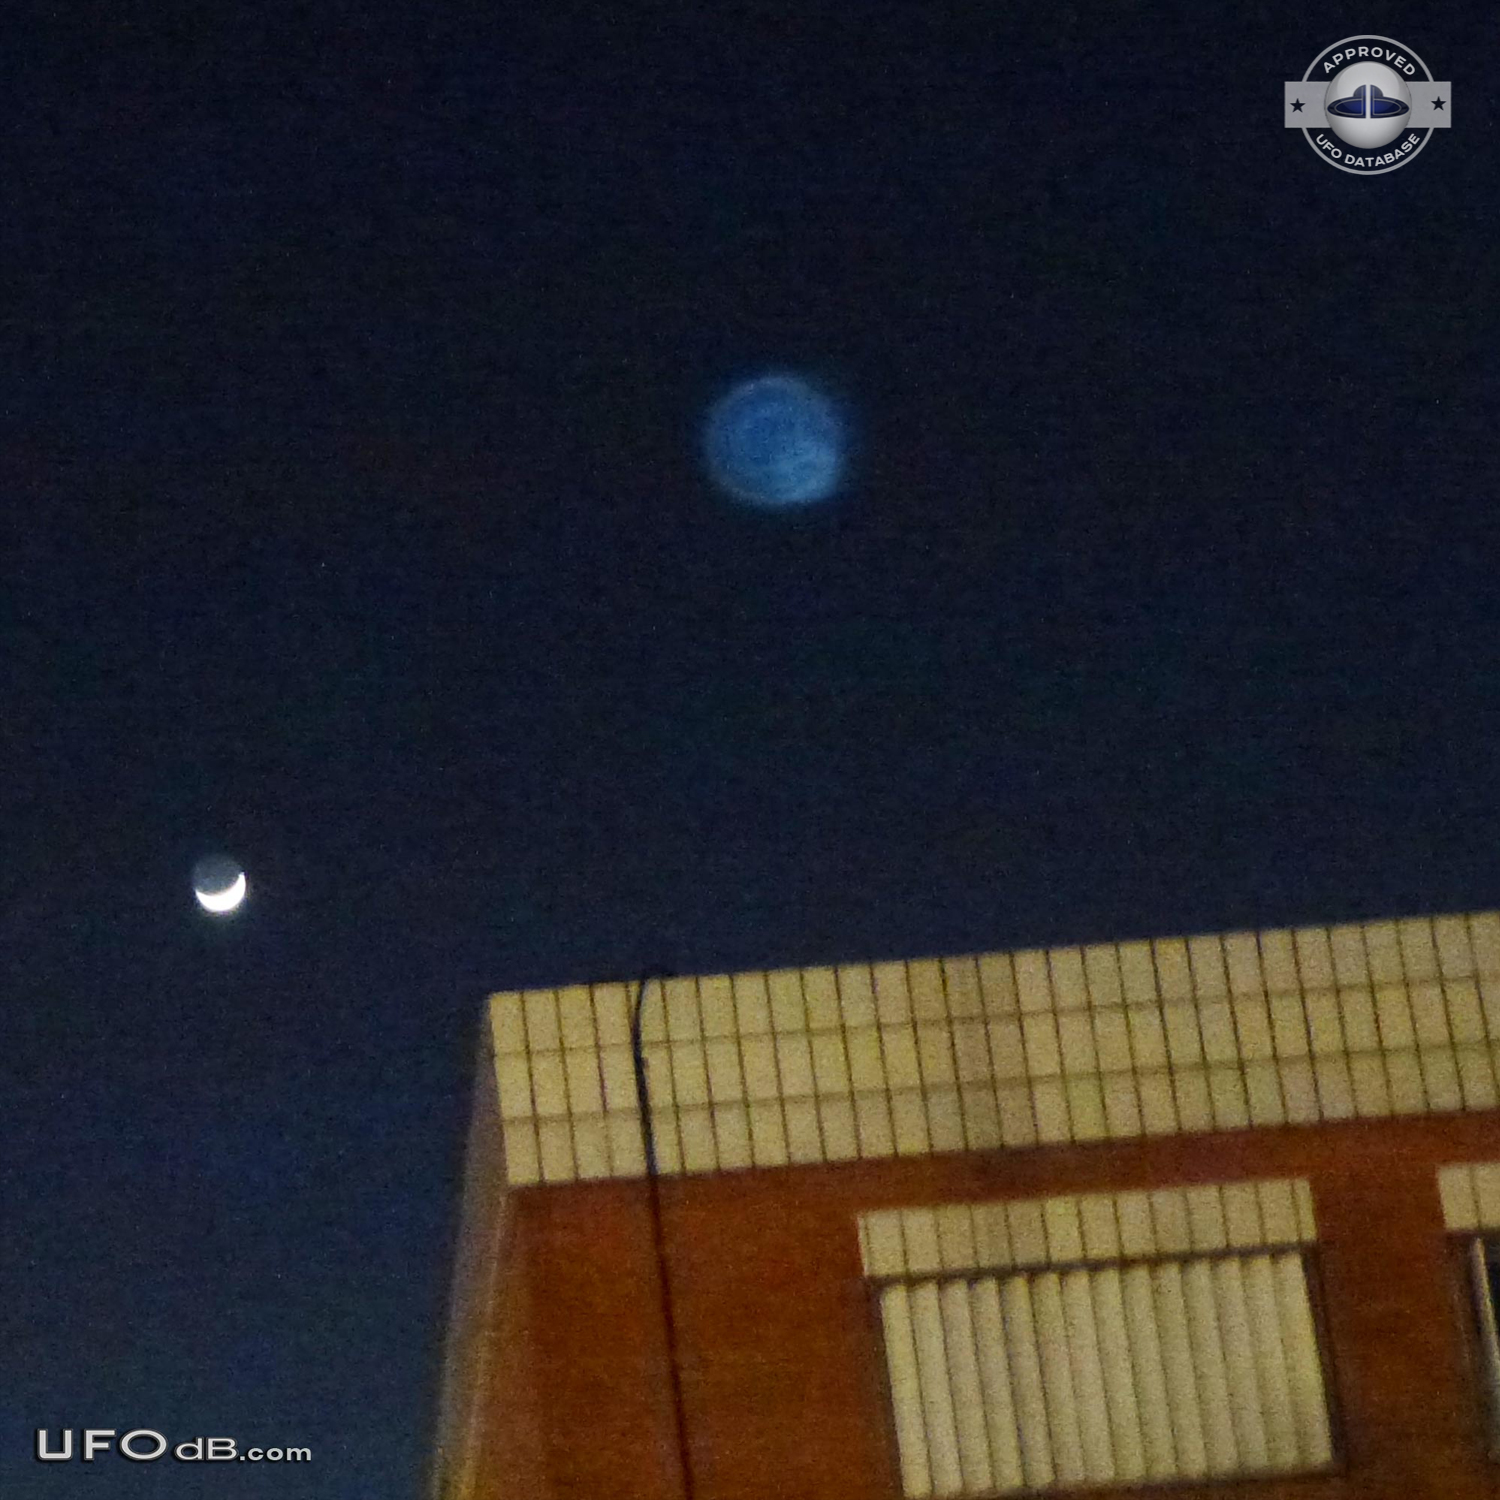 Blue round UFO appears on photo over buildings - Catalonia, Spain 2012 UFO Picture #407-1